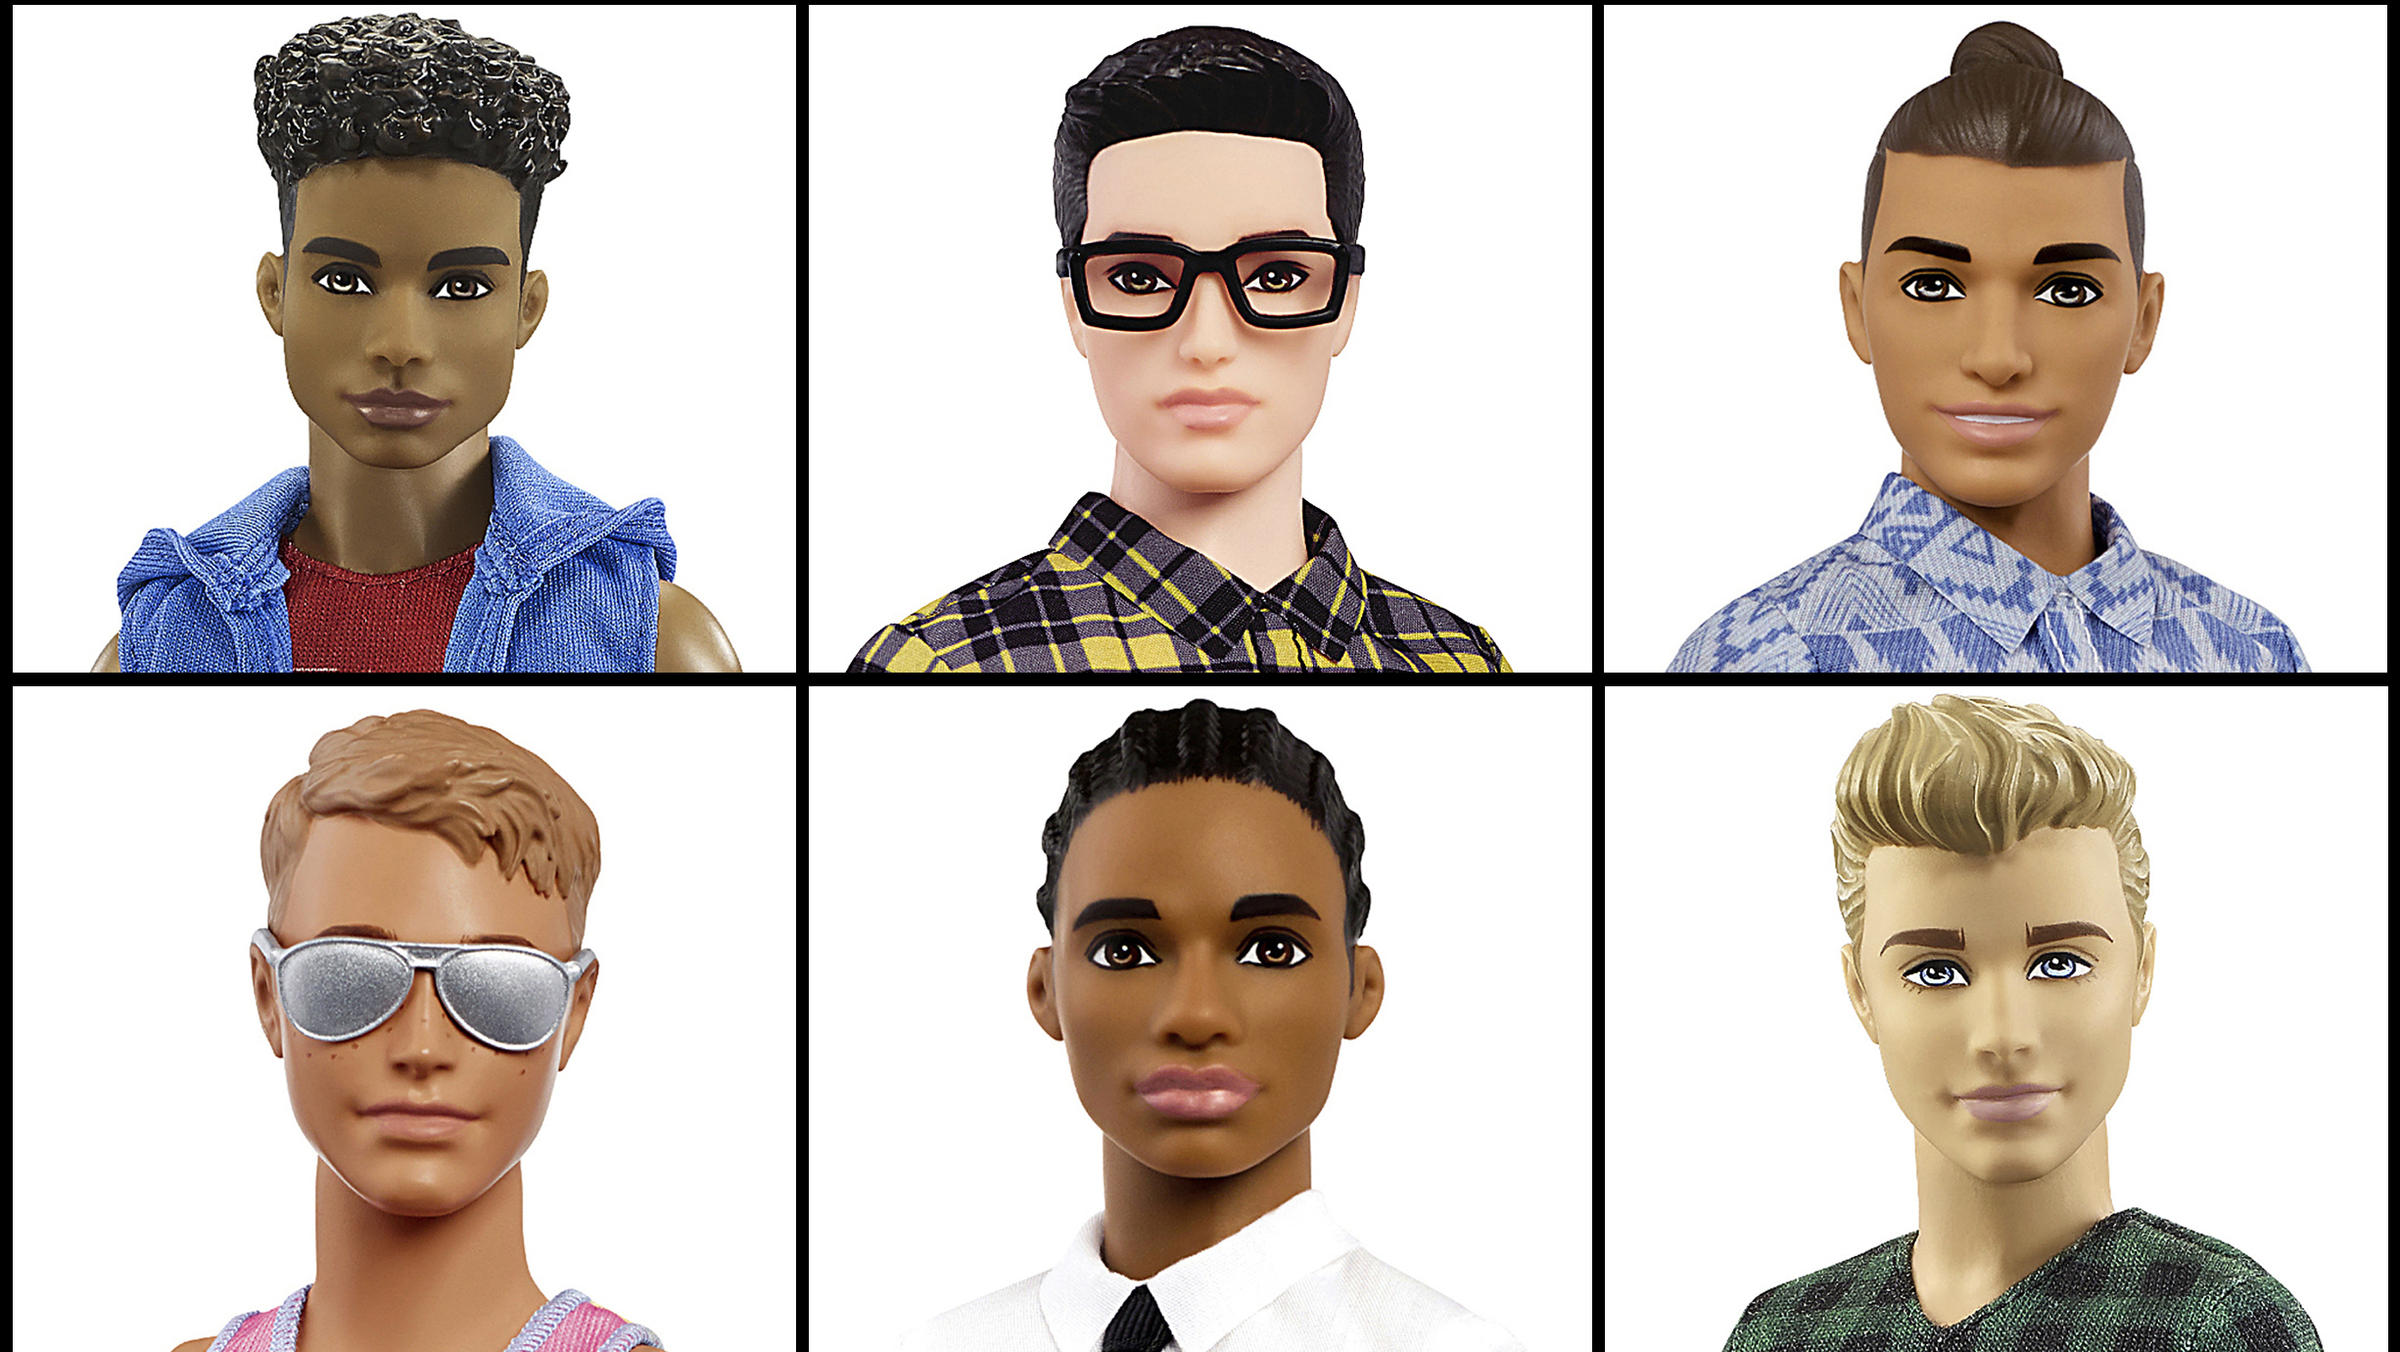 Mattel announced Tuesday that it is introducing 15 new diverse looks for th...